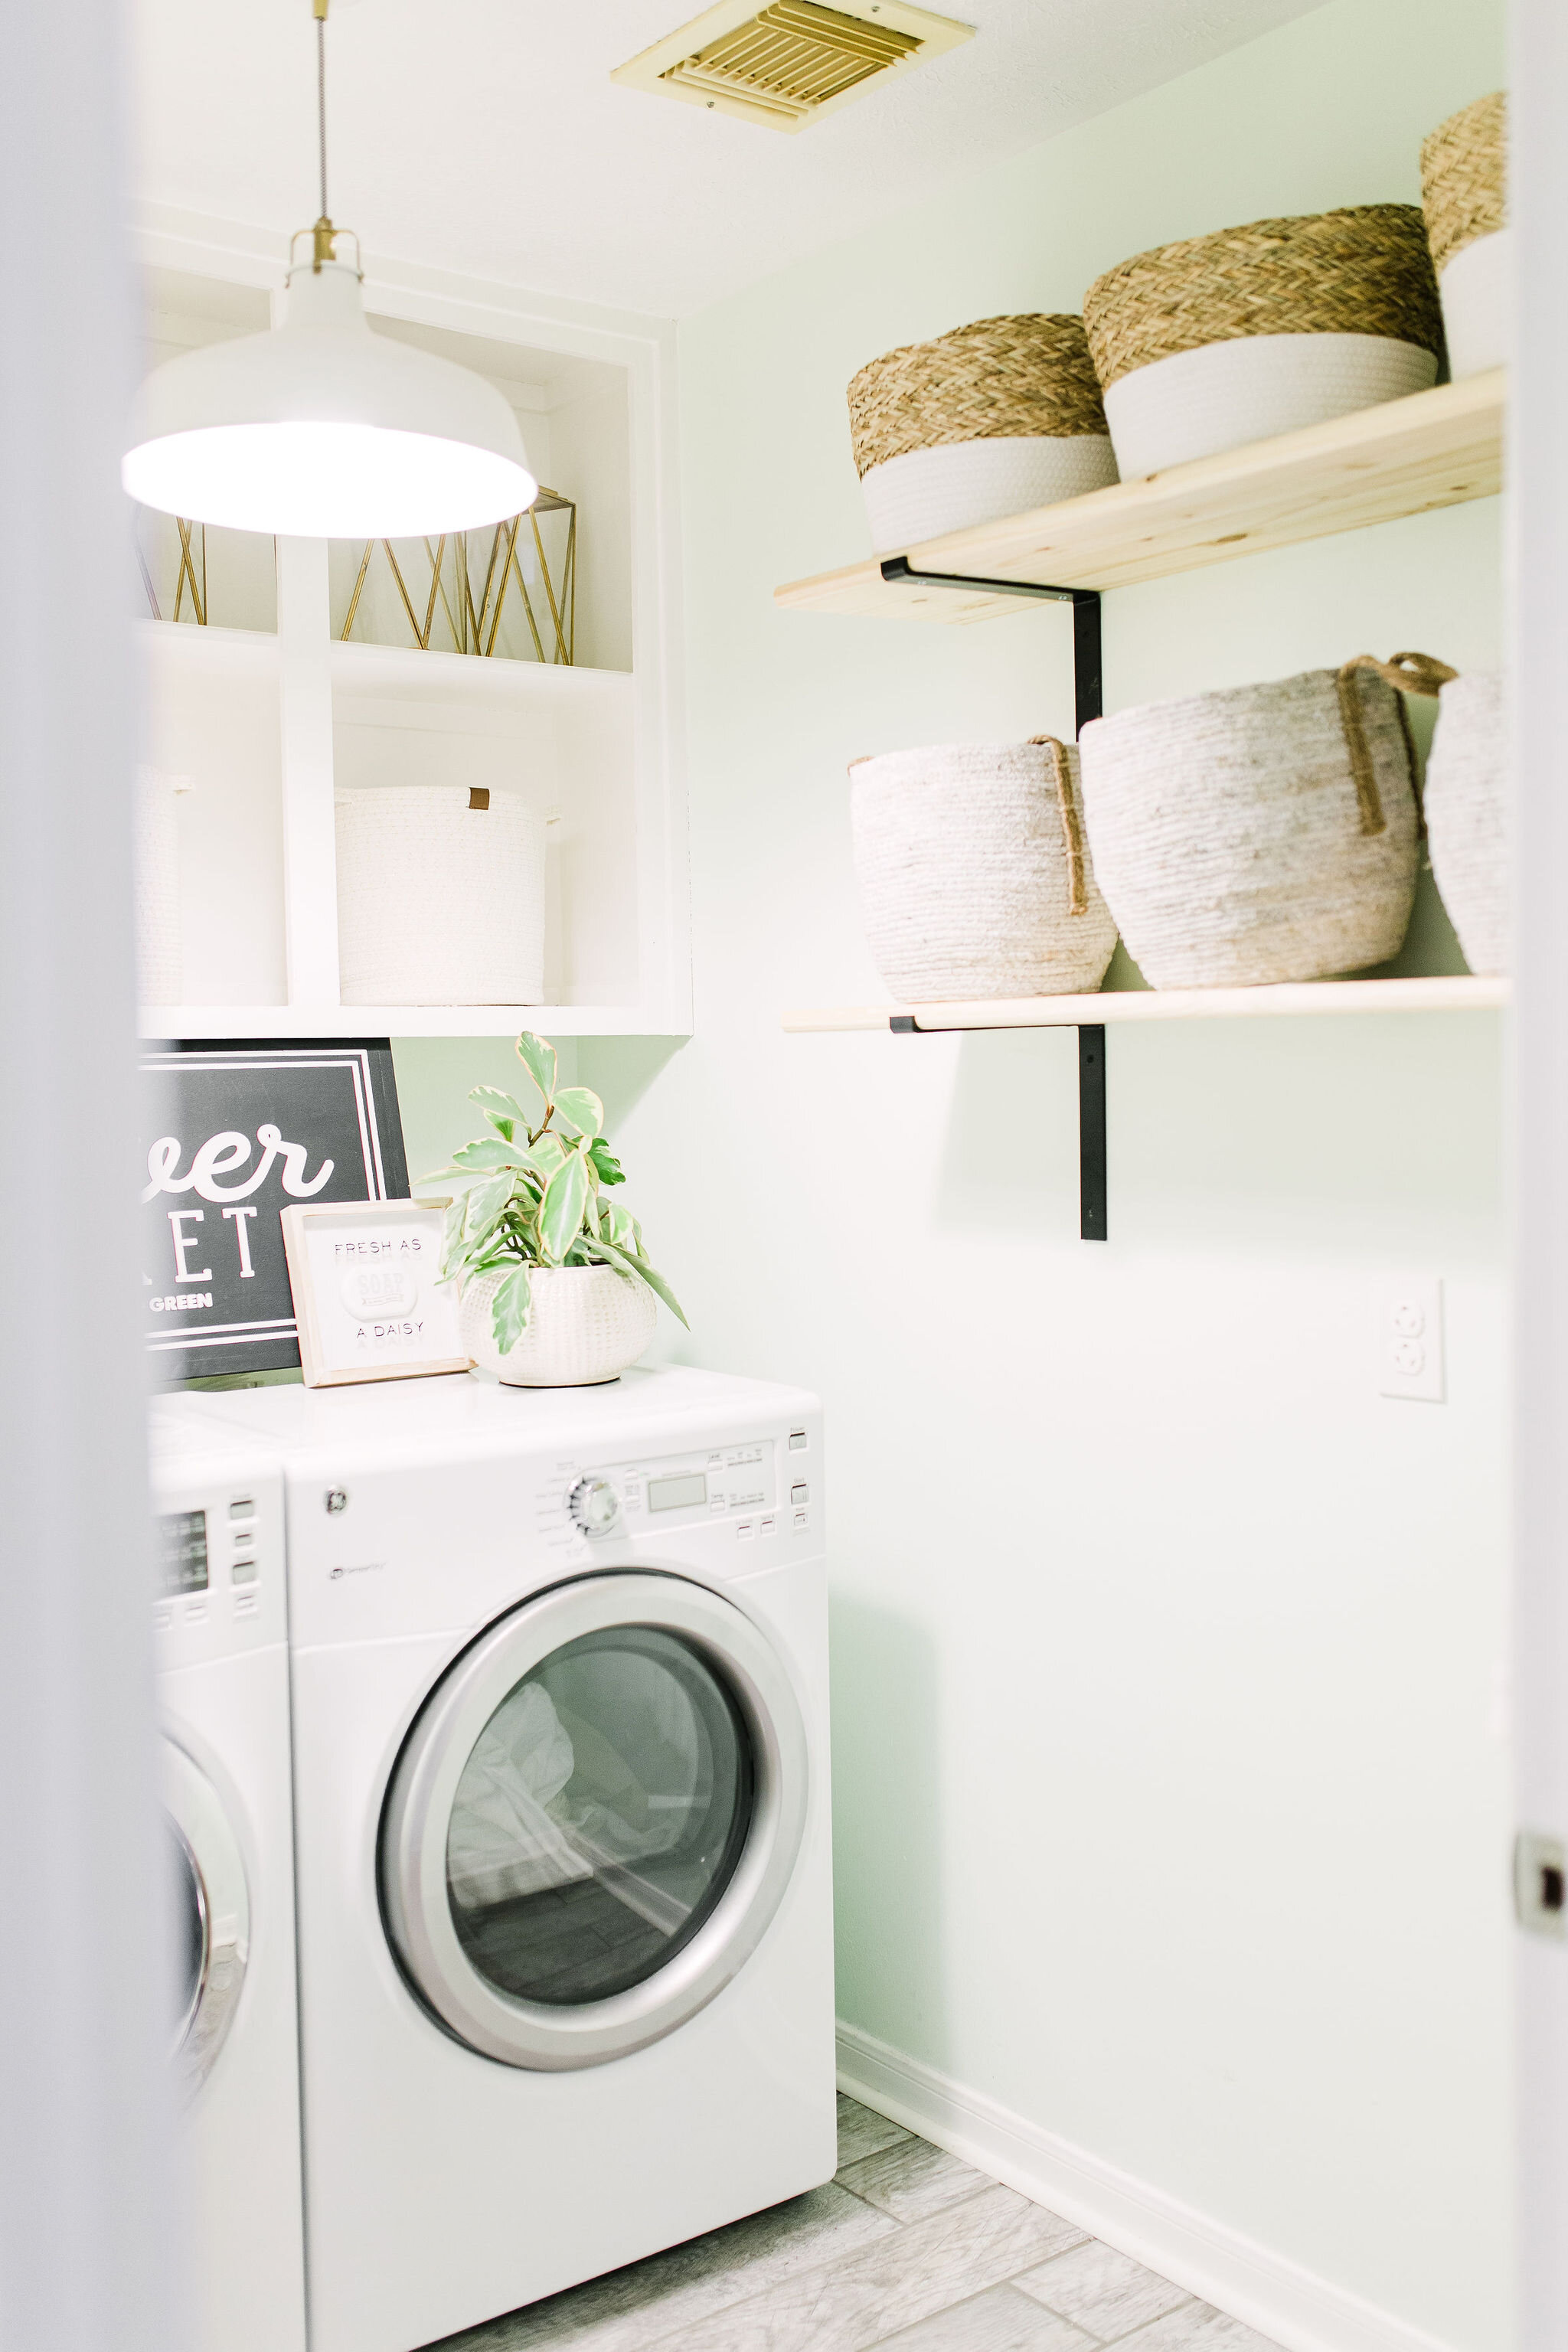 Laundry Room Make Over Transformation with DIY Shelving